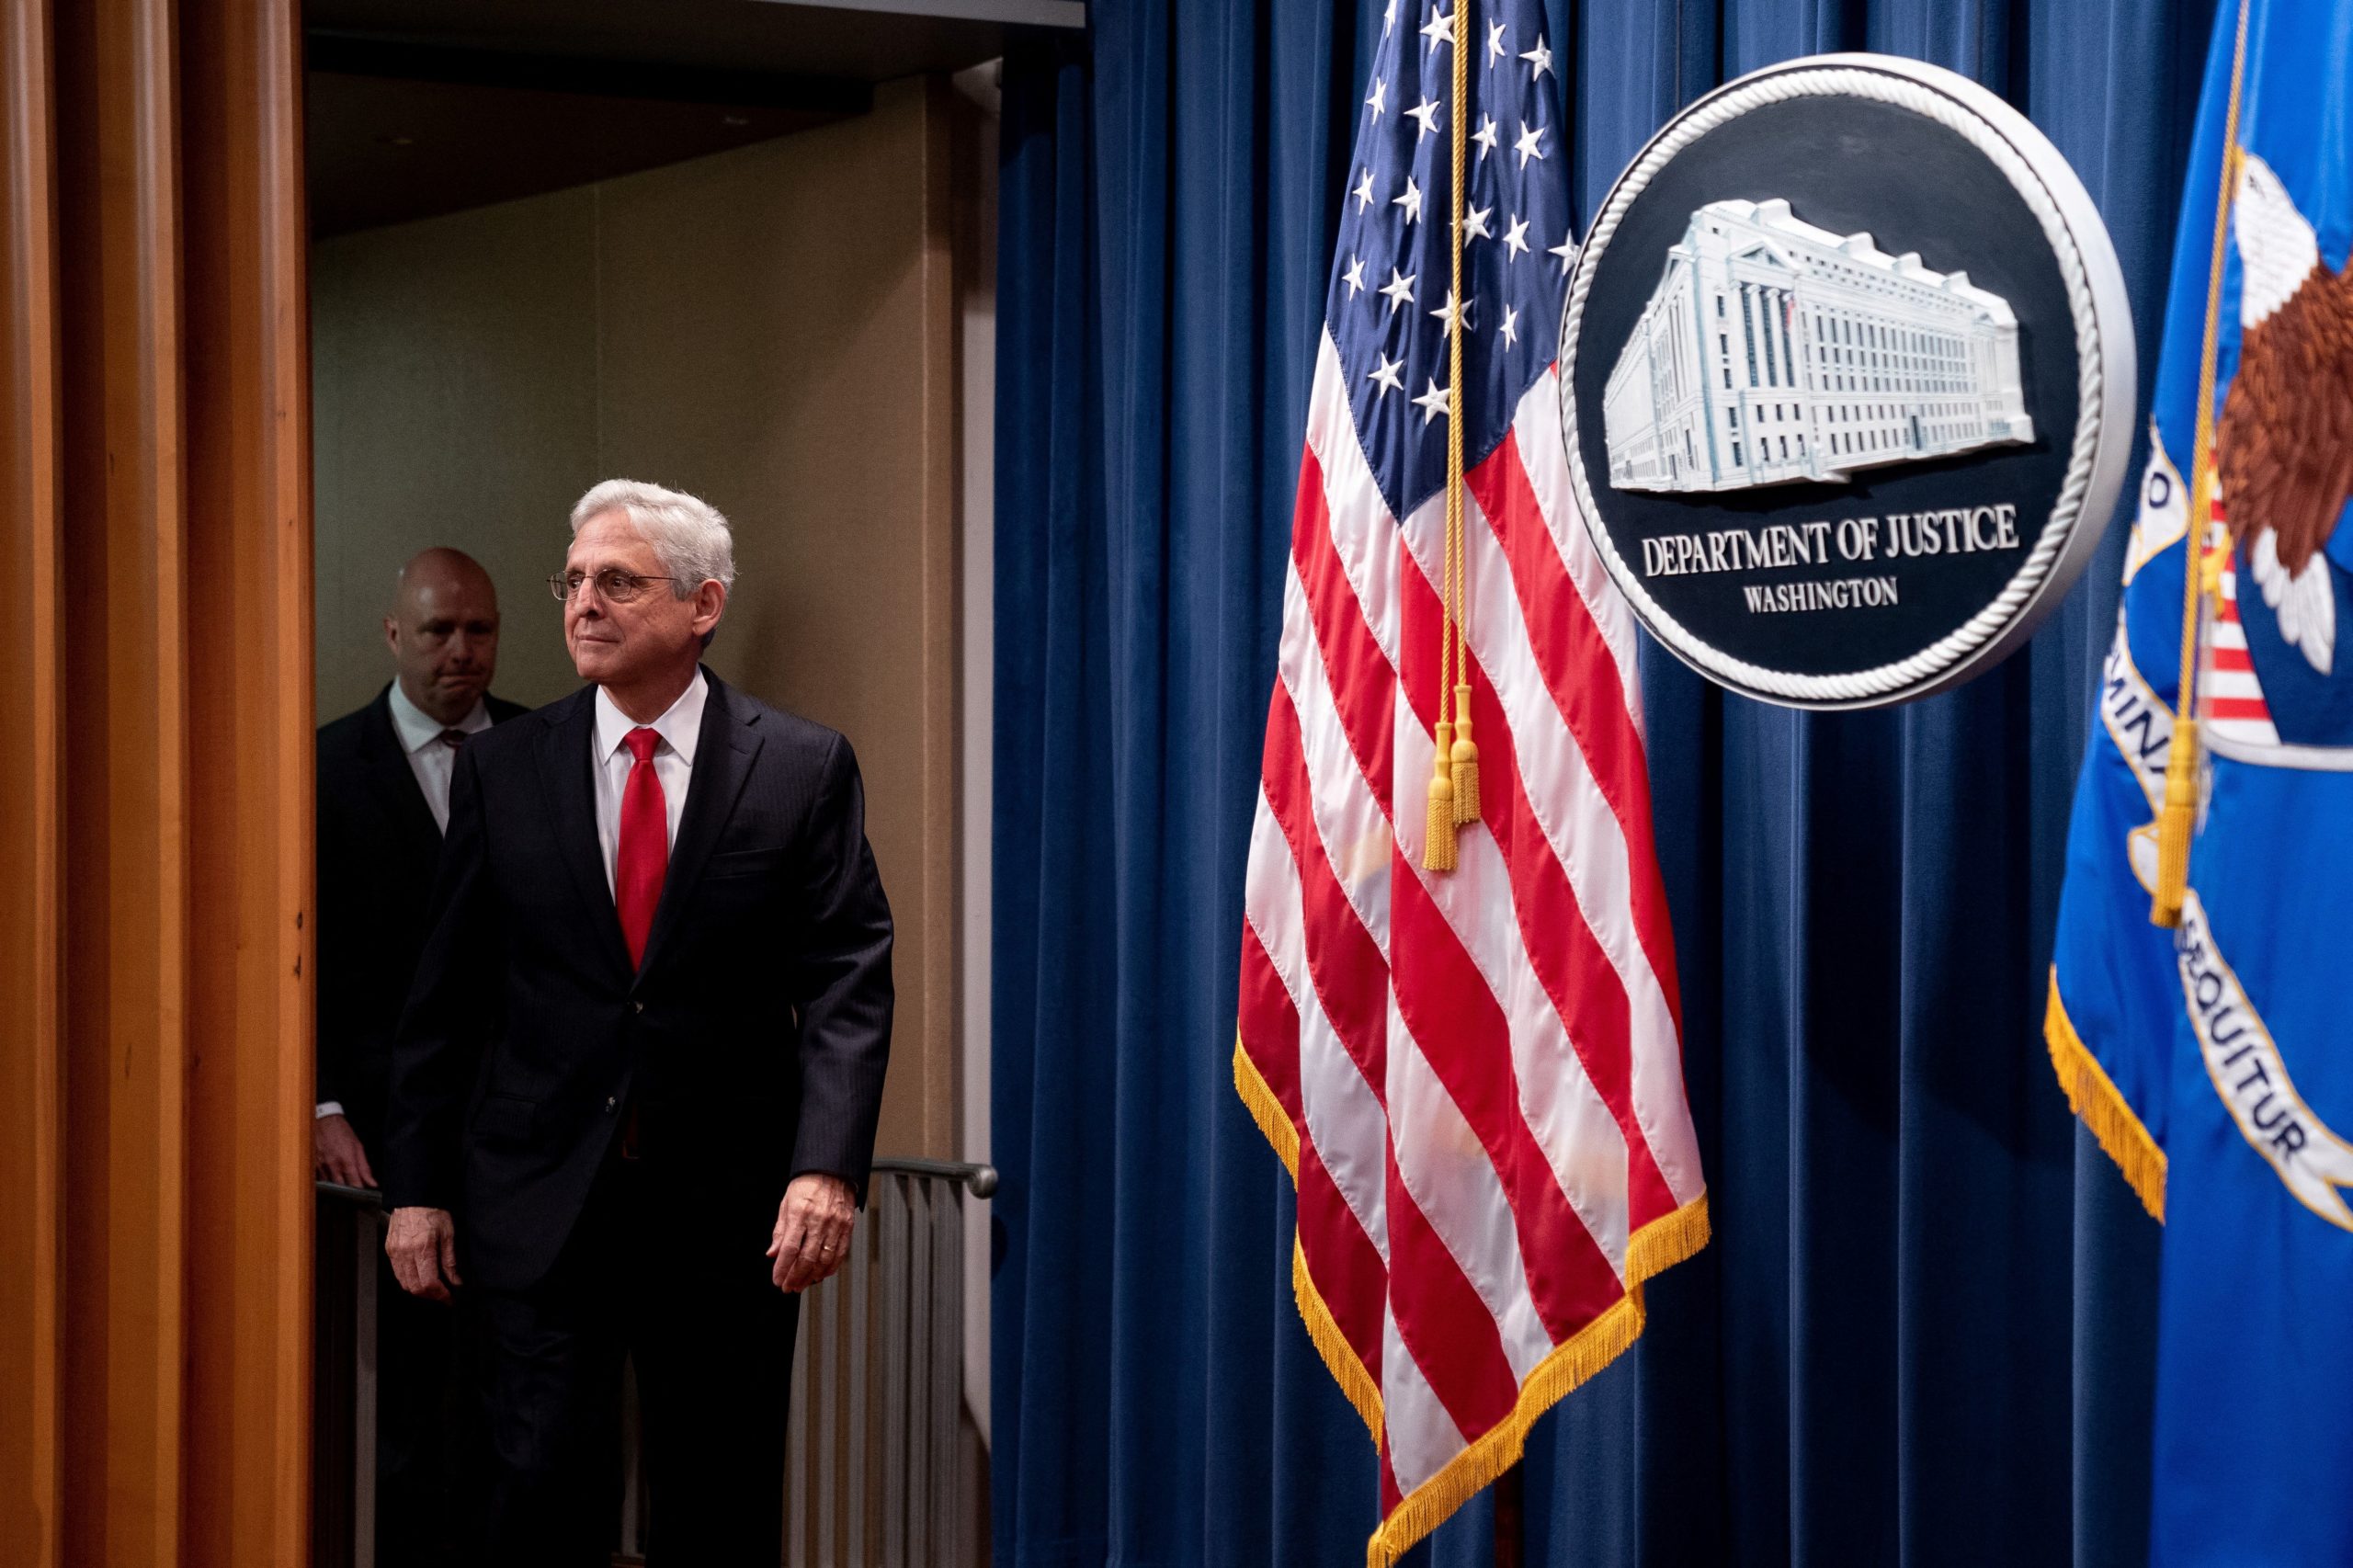 US Attorney General Merrick Garland arrives to speak at a press conference to announce disruptions of the fentanyl precursor chemical supply chain at the Justice Department in Washington, DC, on October 3, 2023. The United States announced sanctions Tuesday on a China-based network for producing and distributing chemicals used to make drugs including those that have fueled a deadly national fentanyl crisis. (Photo by Stefani Reynolds / AFP) (Photo by STEFANI REYNOLDS/AFP via Getty Images)